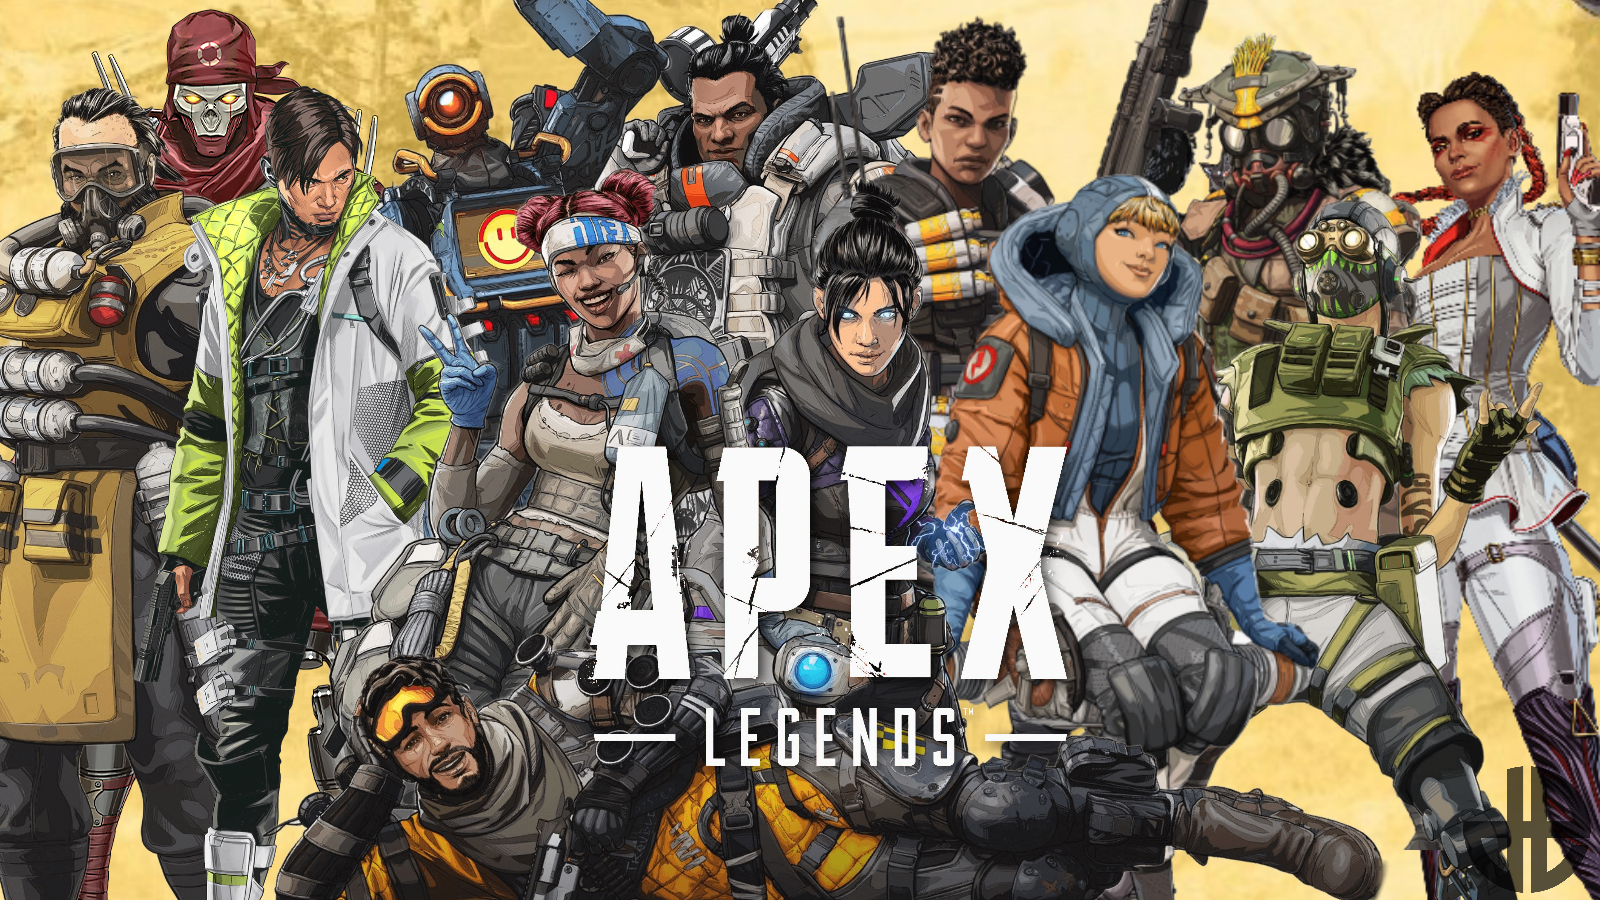 How to Pre-Register for Apex Legends Mobile Right Now (2022)